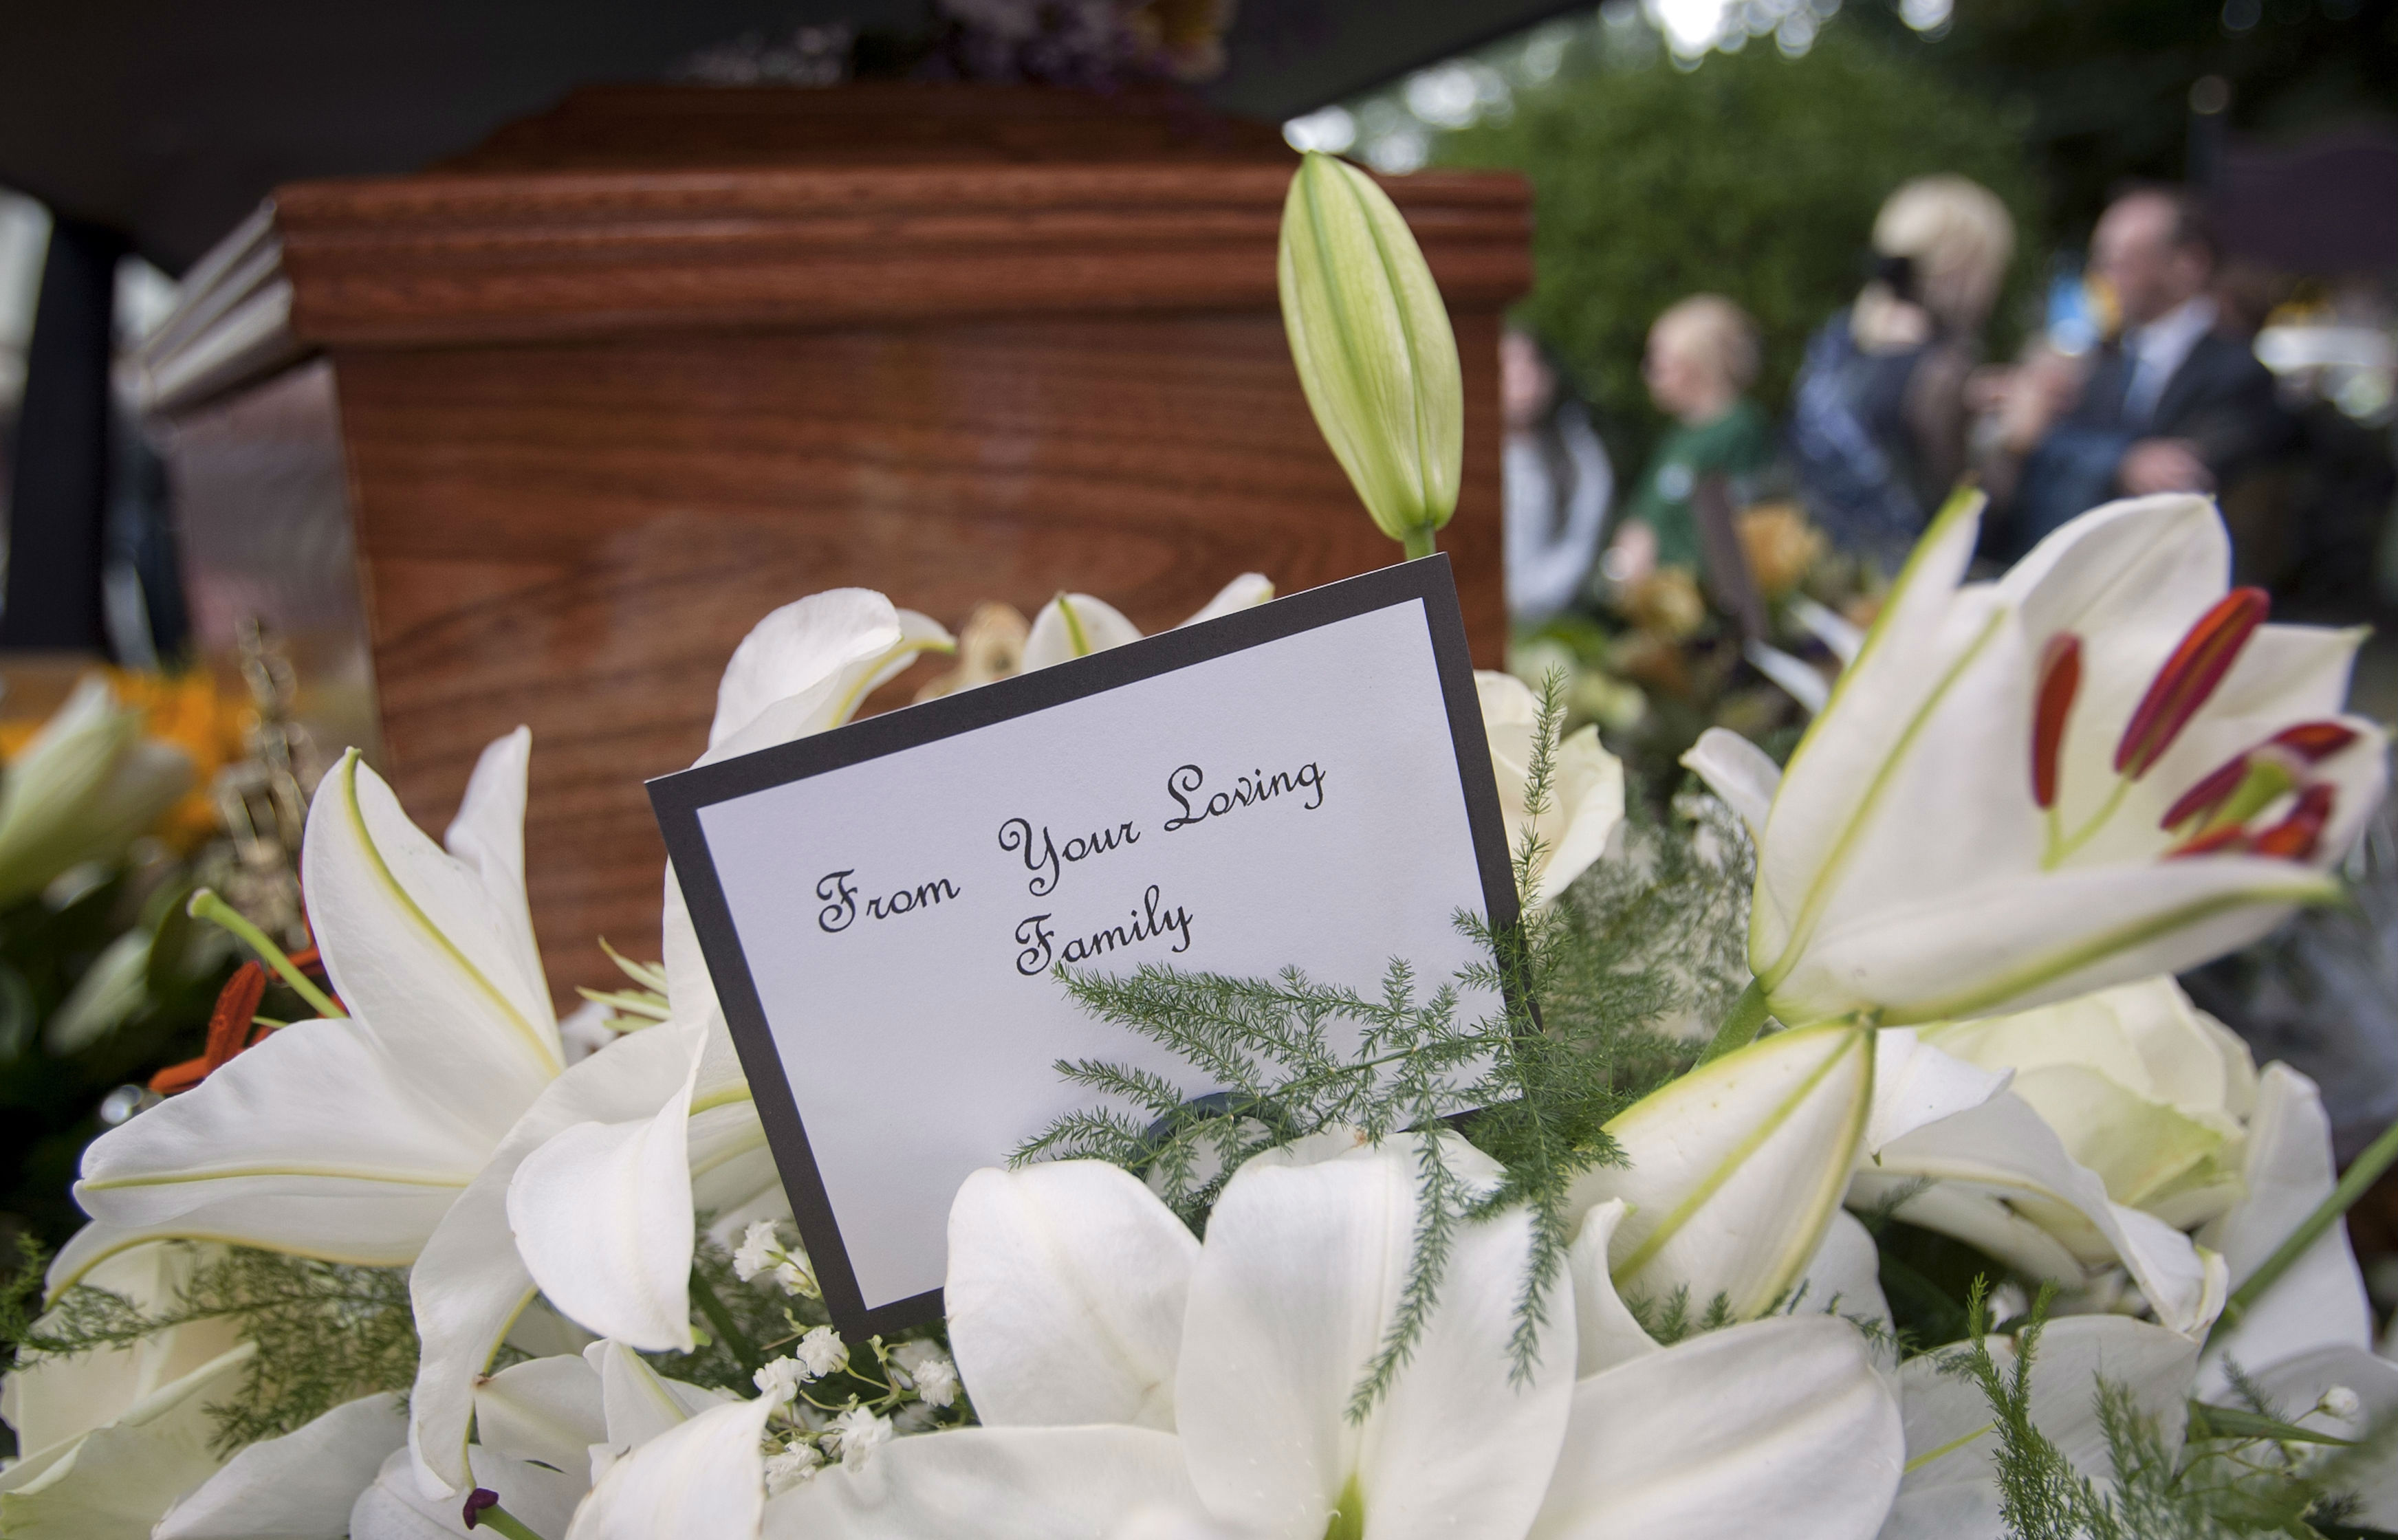 Cost of a simple funeral leading poor families into debt, MPs warn